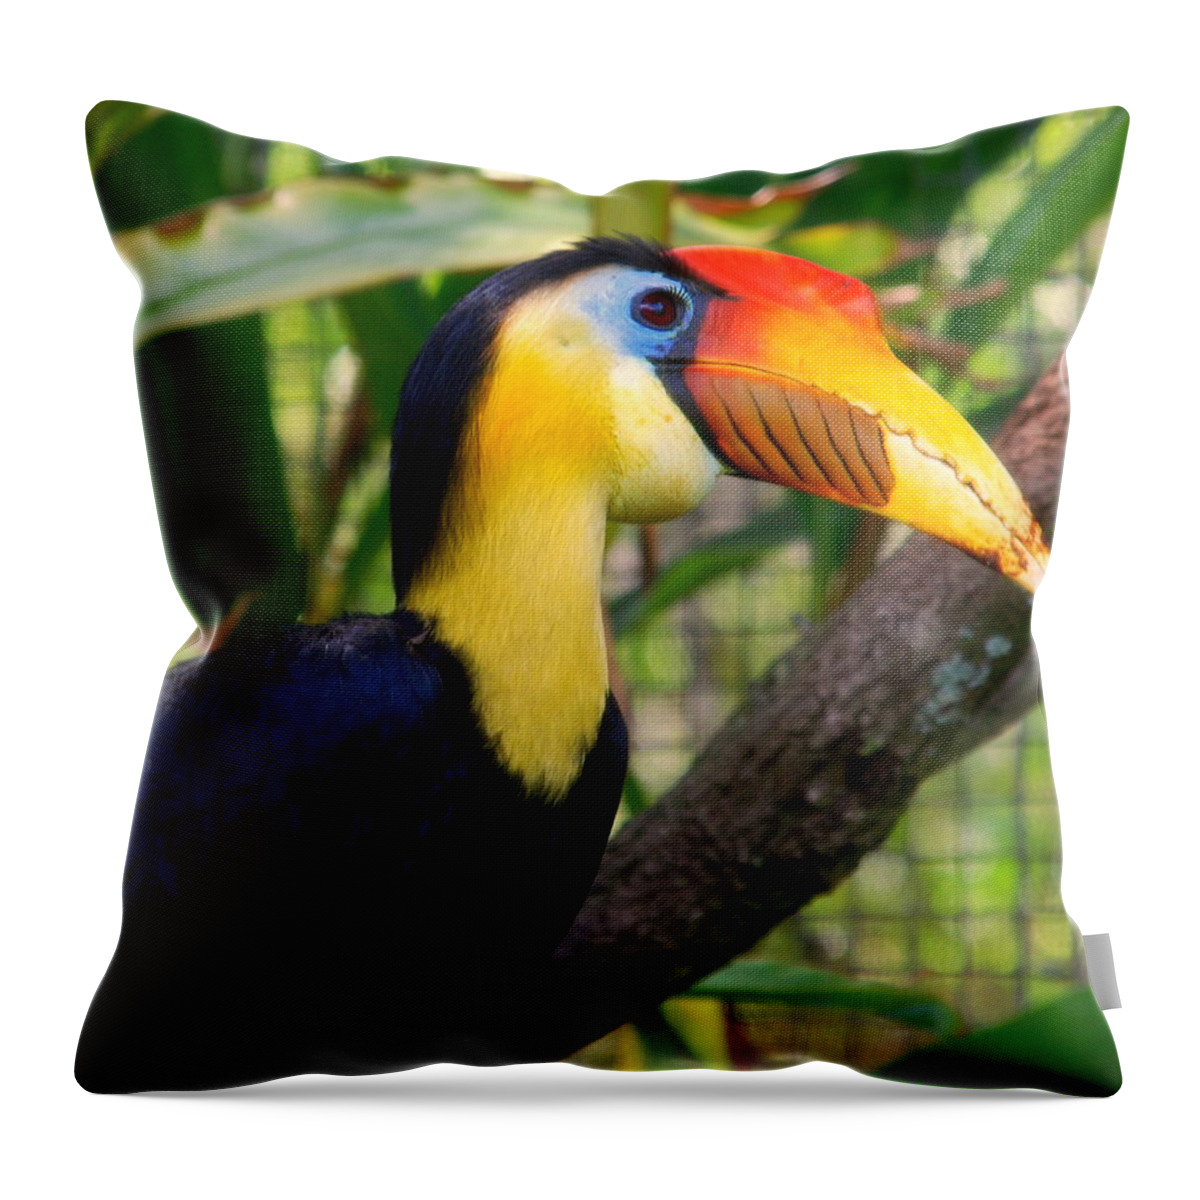 Wrinkled Hornbill Throw Pillow featuring the photograph Wrinkled Hornbill by Susanne Van Hulst